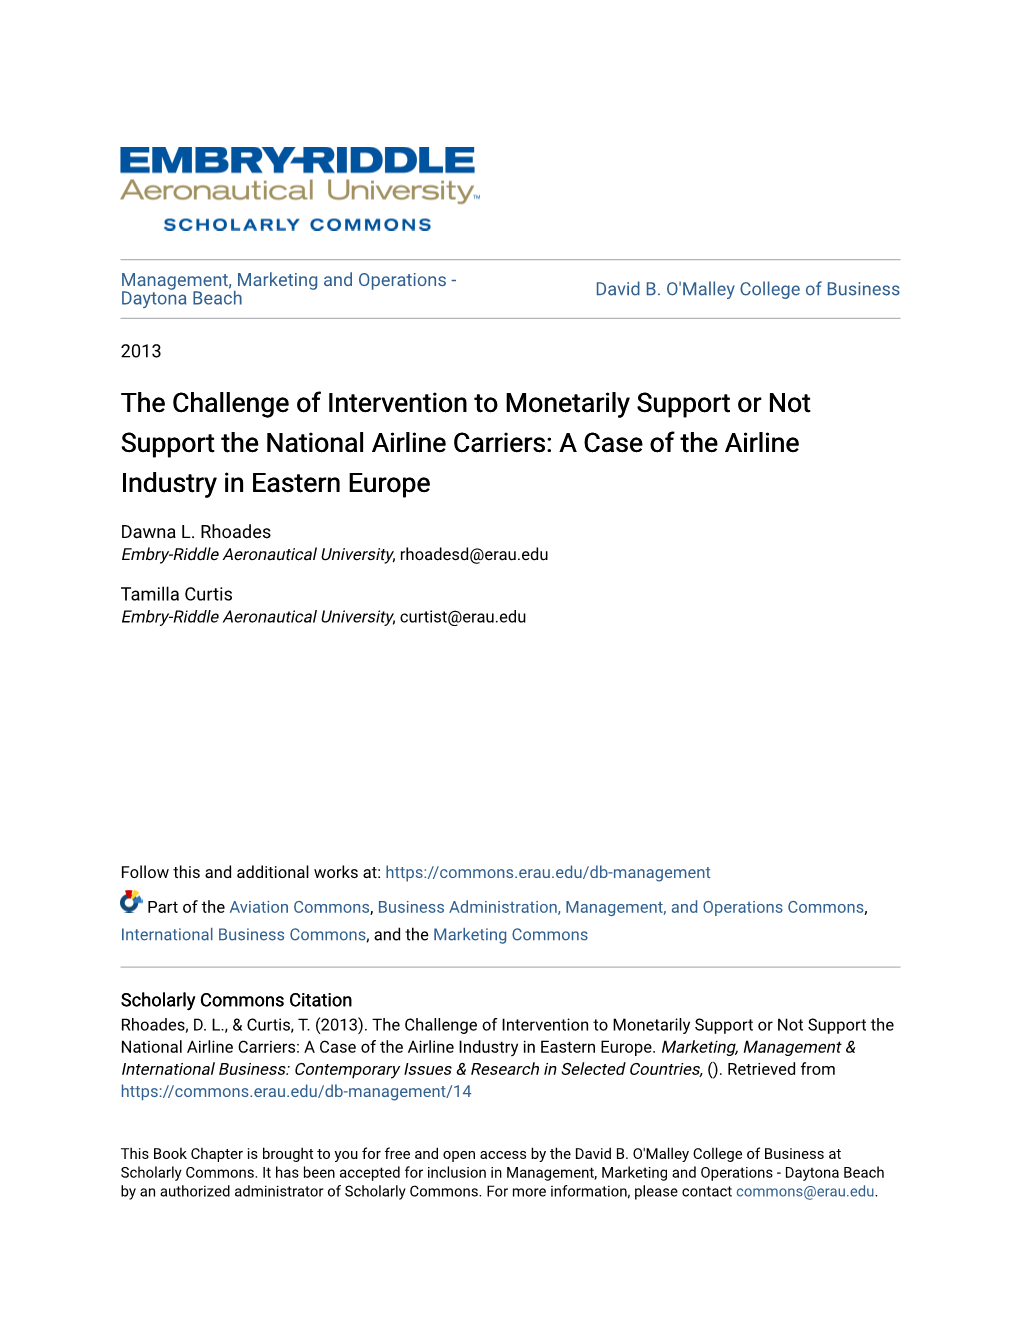 The Challenge of Intervention to Monetarily Support Or Not Support the National Airline Carriers: a Case of the Airline Industry in Eastern Europe